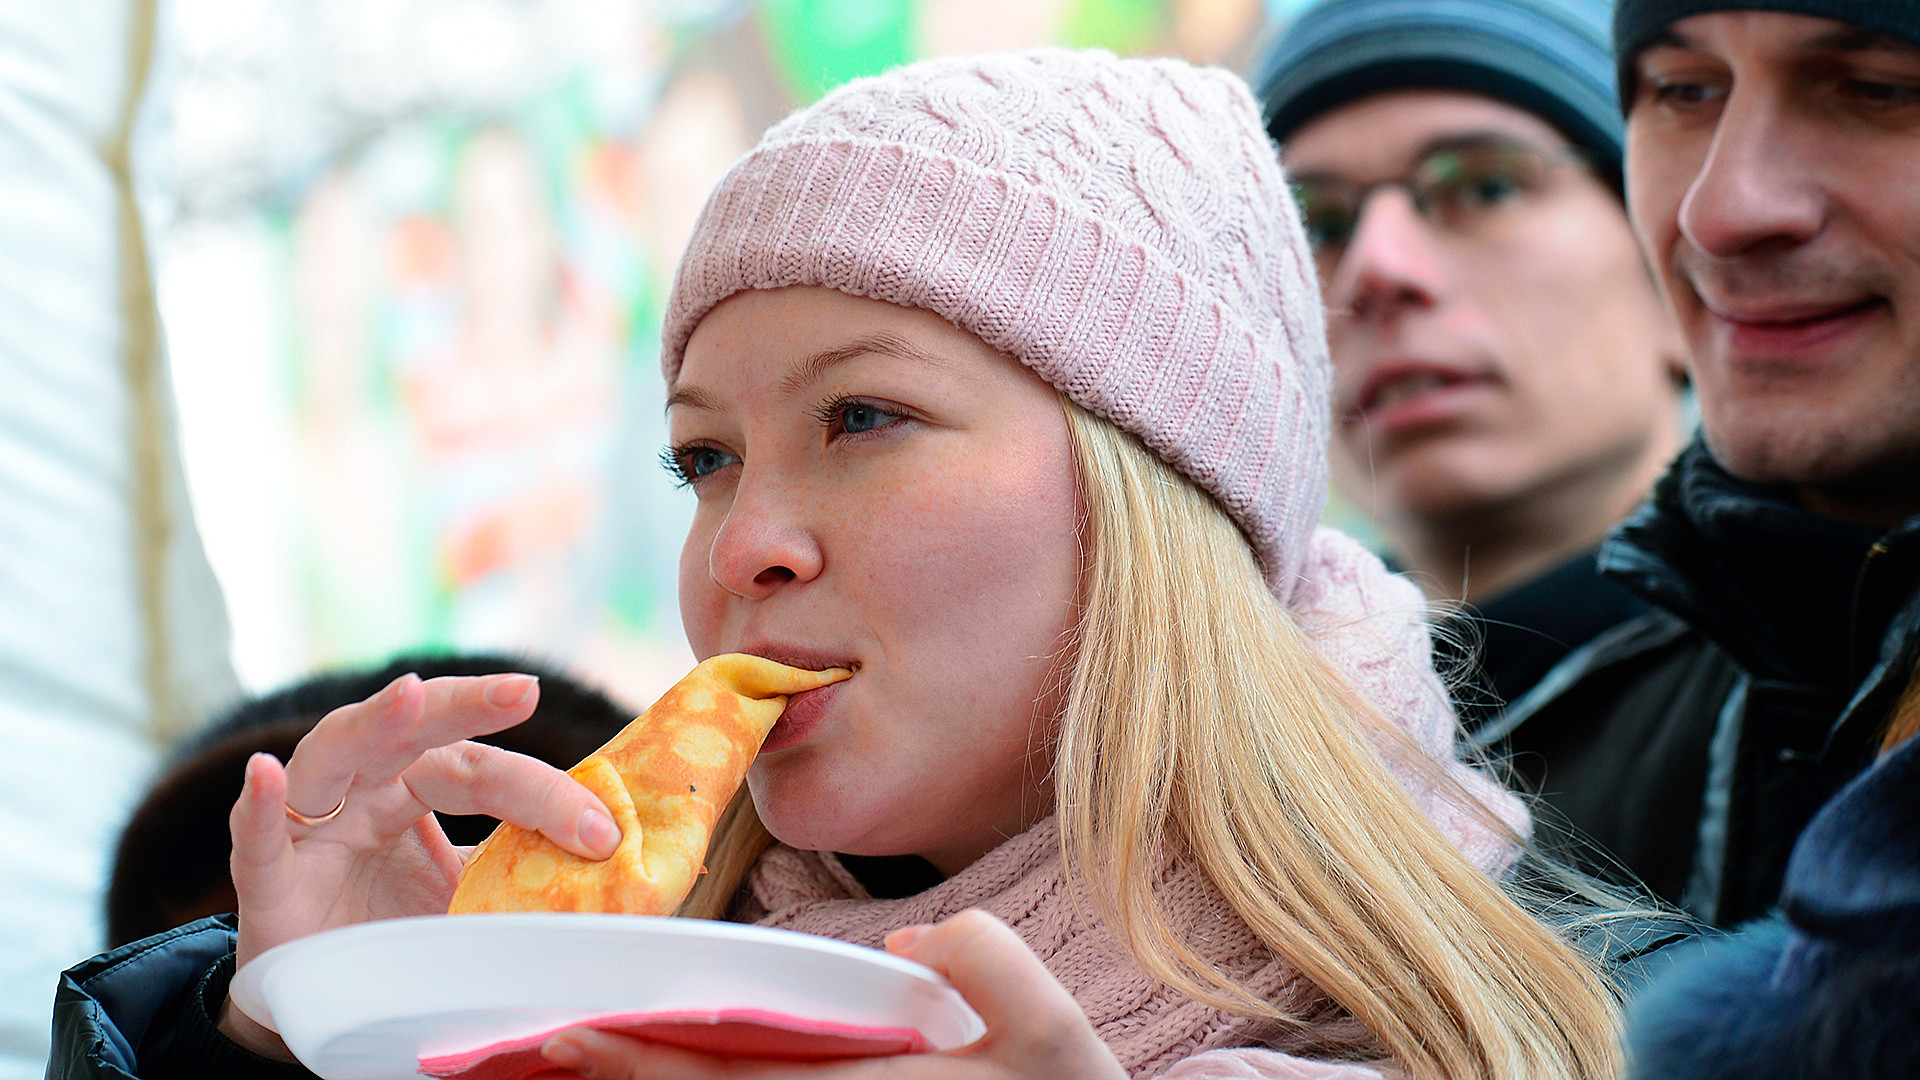 A young lady eats pancakes during Shrovetide festivities in Moscow's Gorky Park.